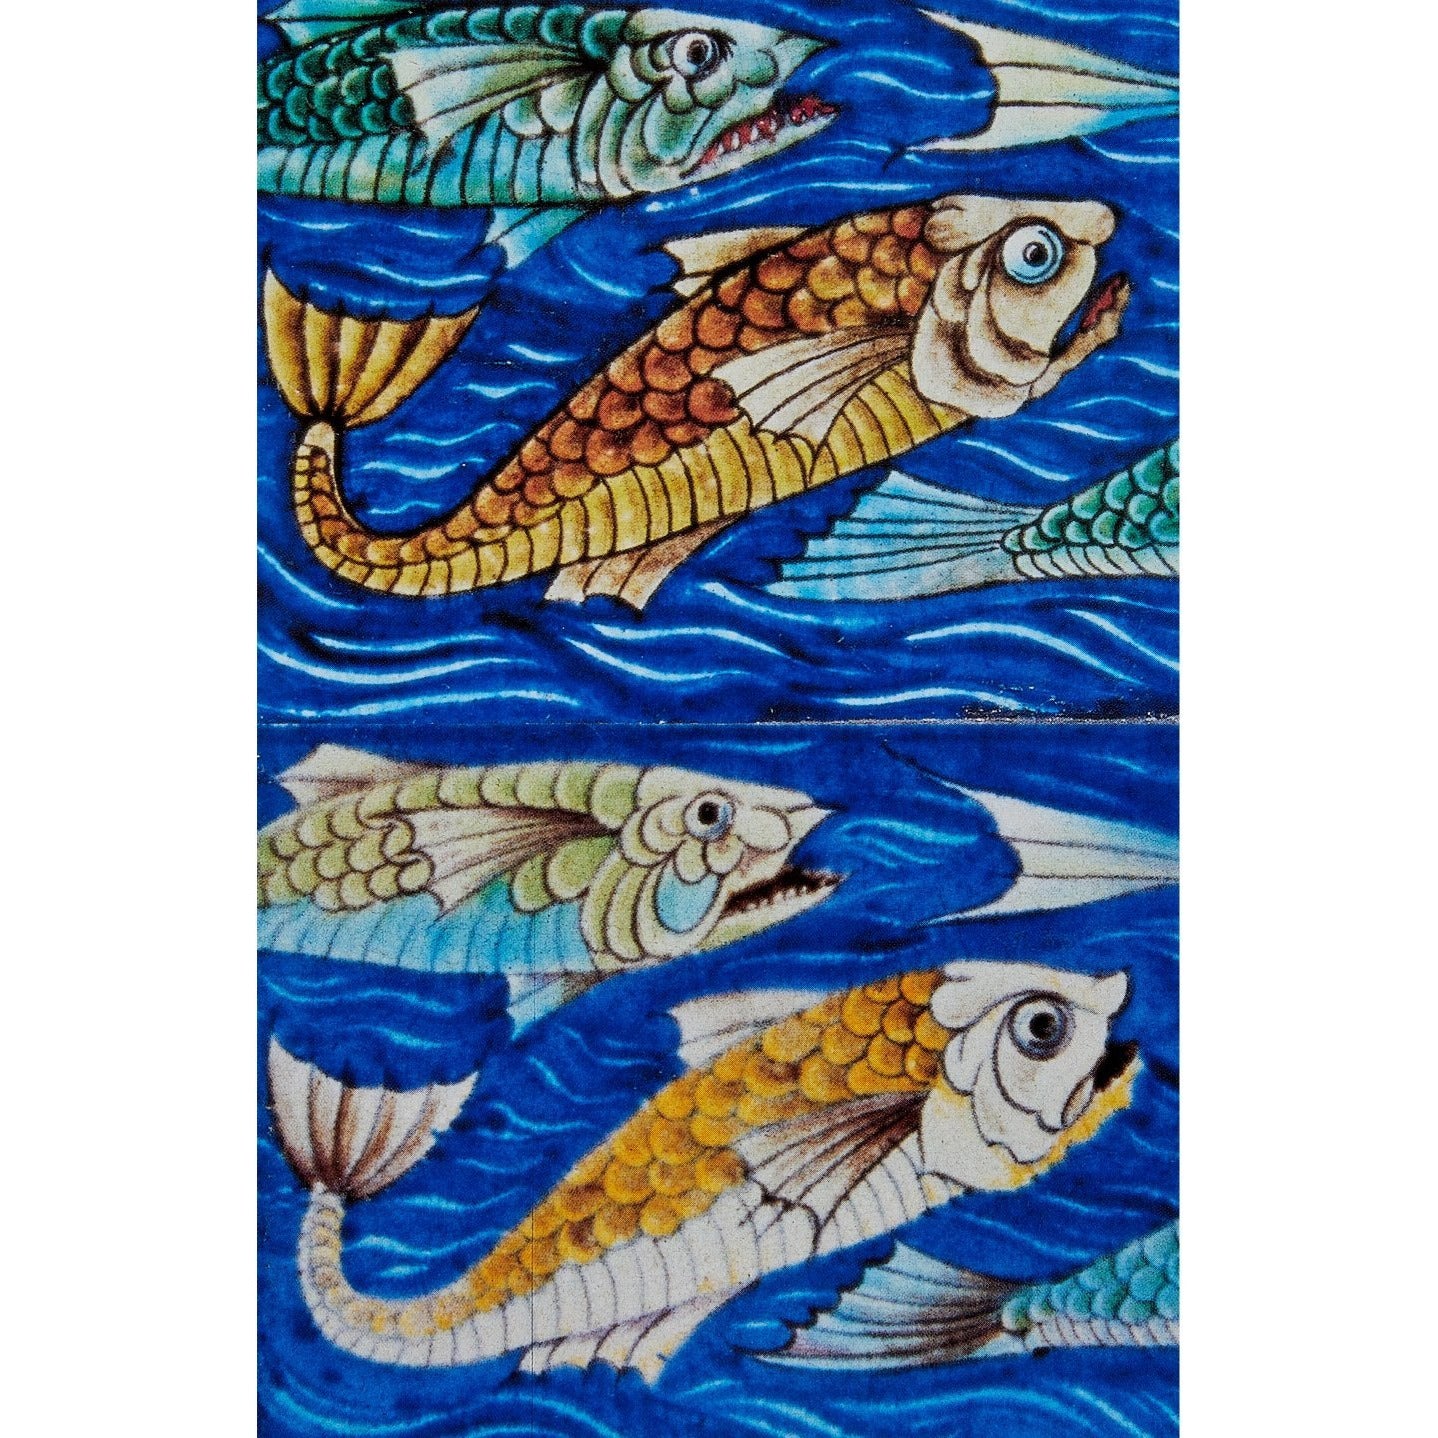 Notecard - fish tiles by William de Morgan & Co. From the collection of the Fitzwilliam Museum, brought to you by CuratingCambridge.co.uk